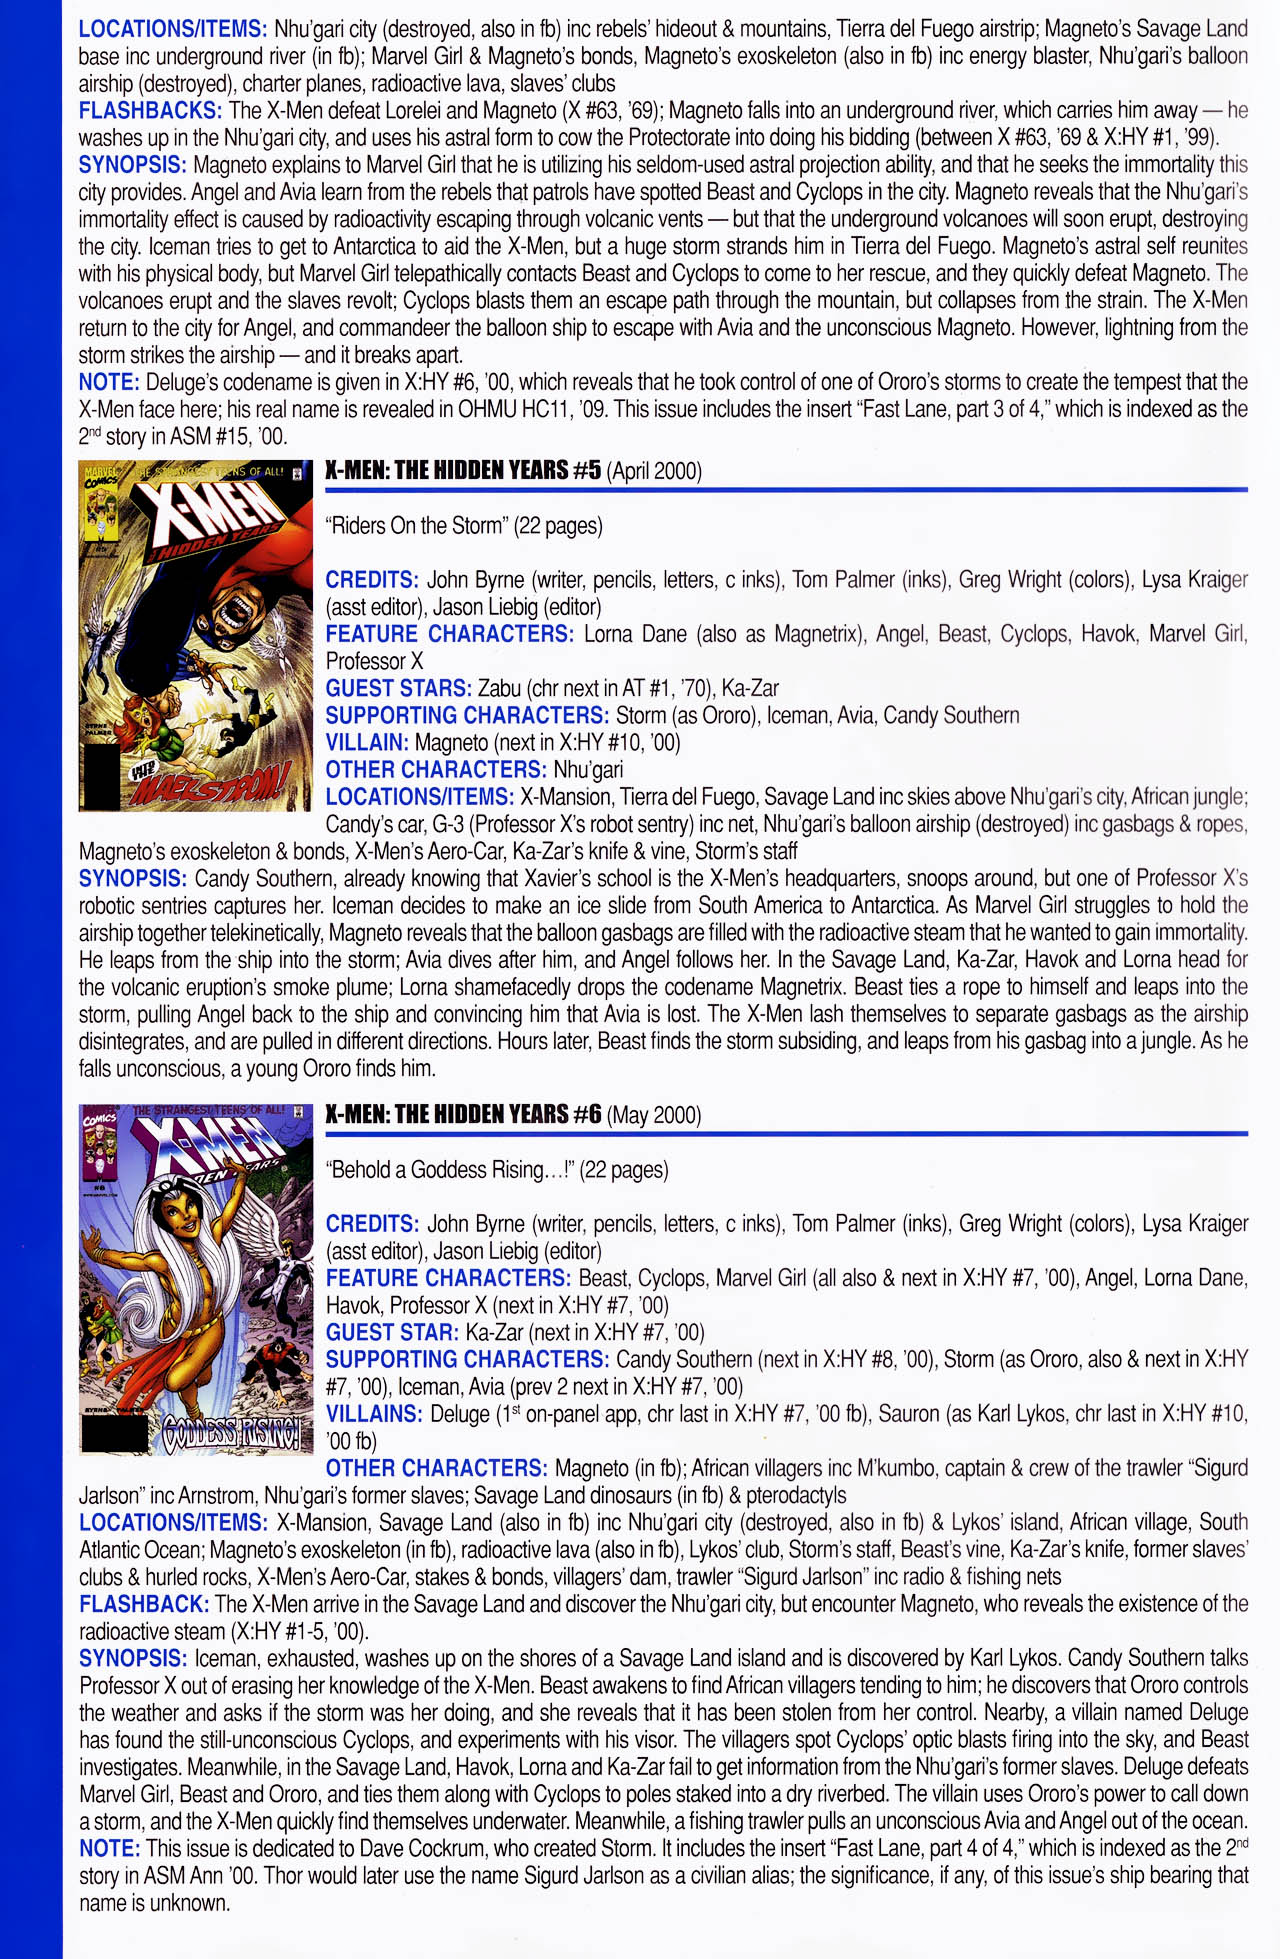 Read online Official Index to the Marvel Universe comic -  Issue #13 - 66